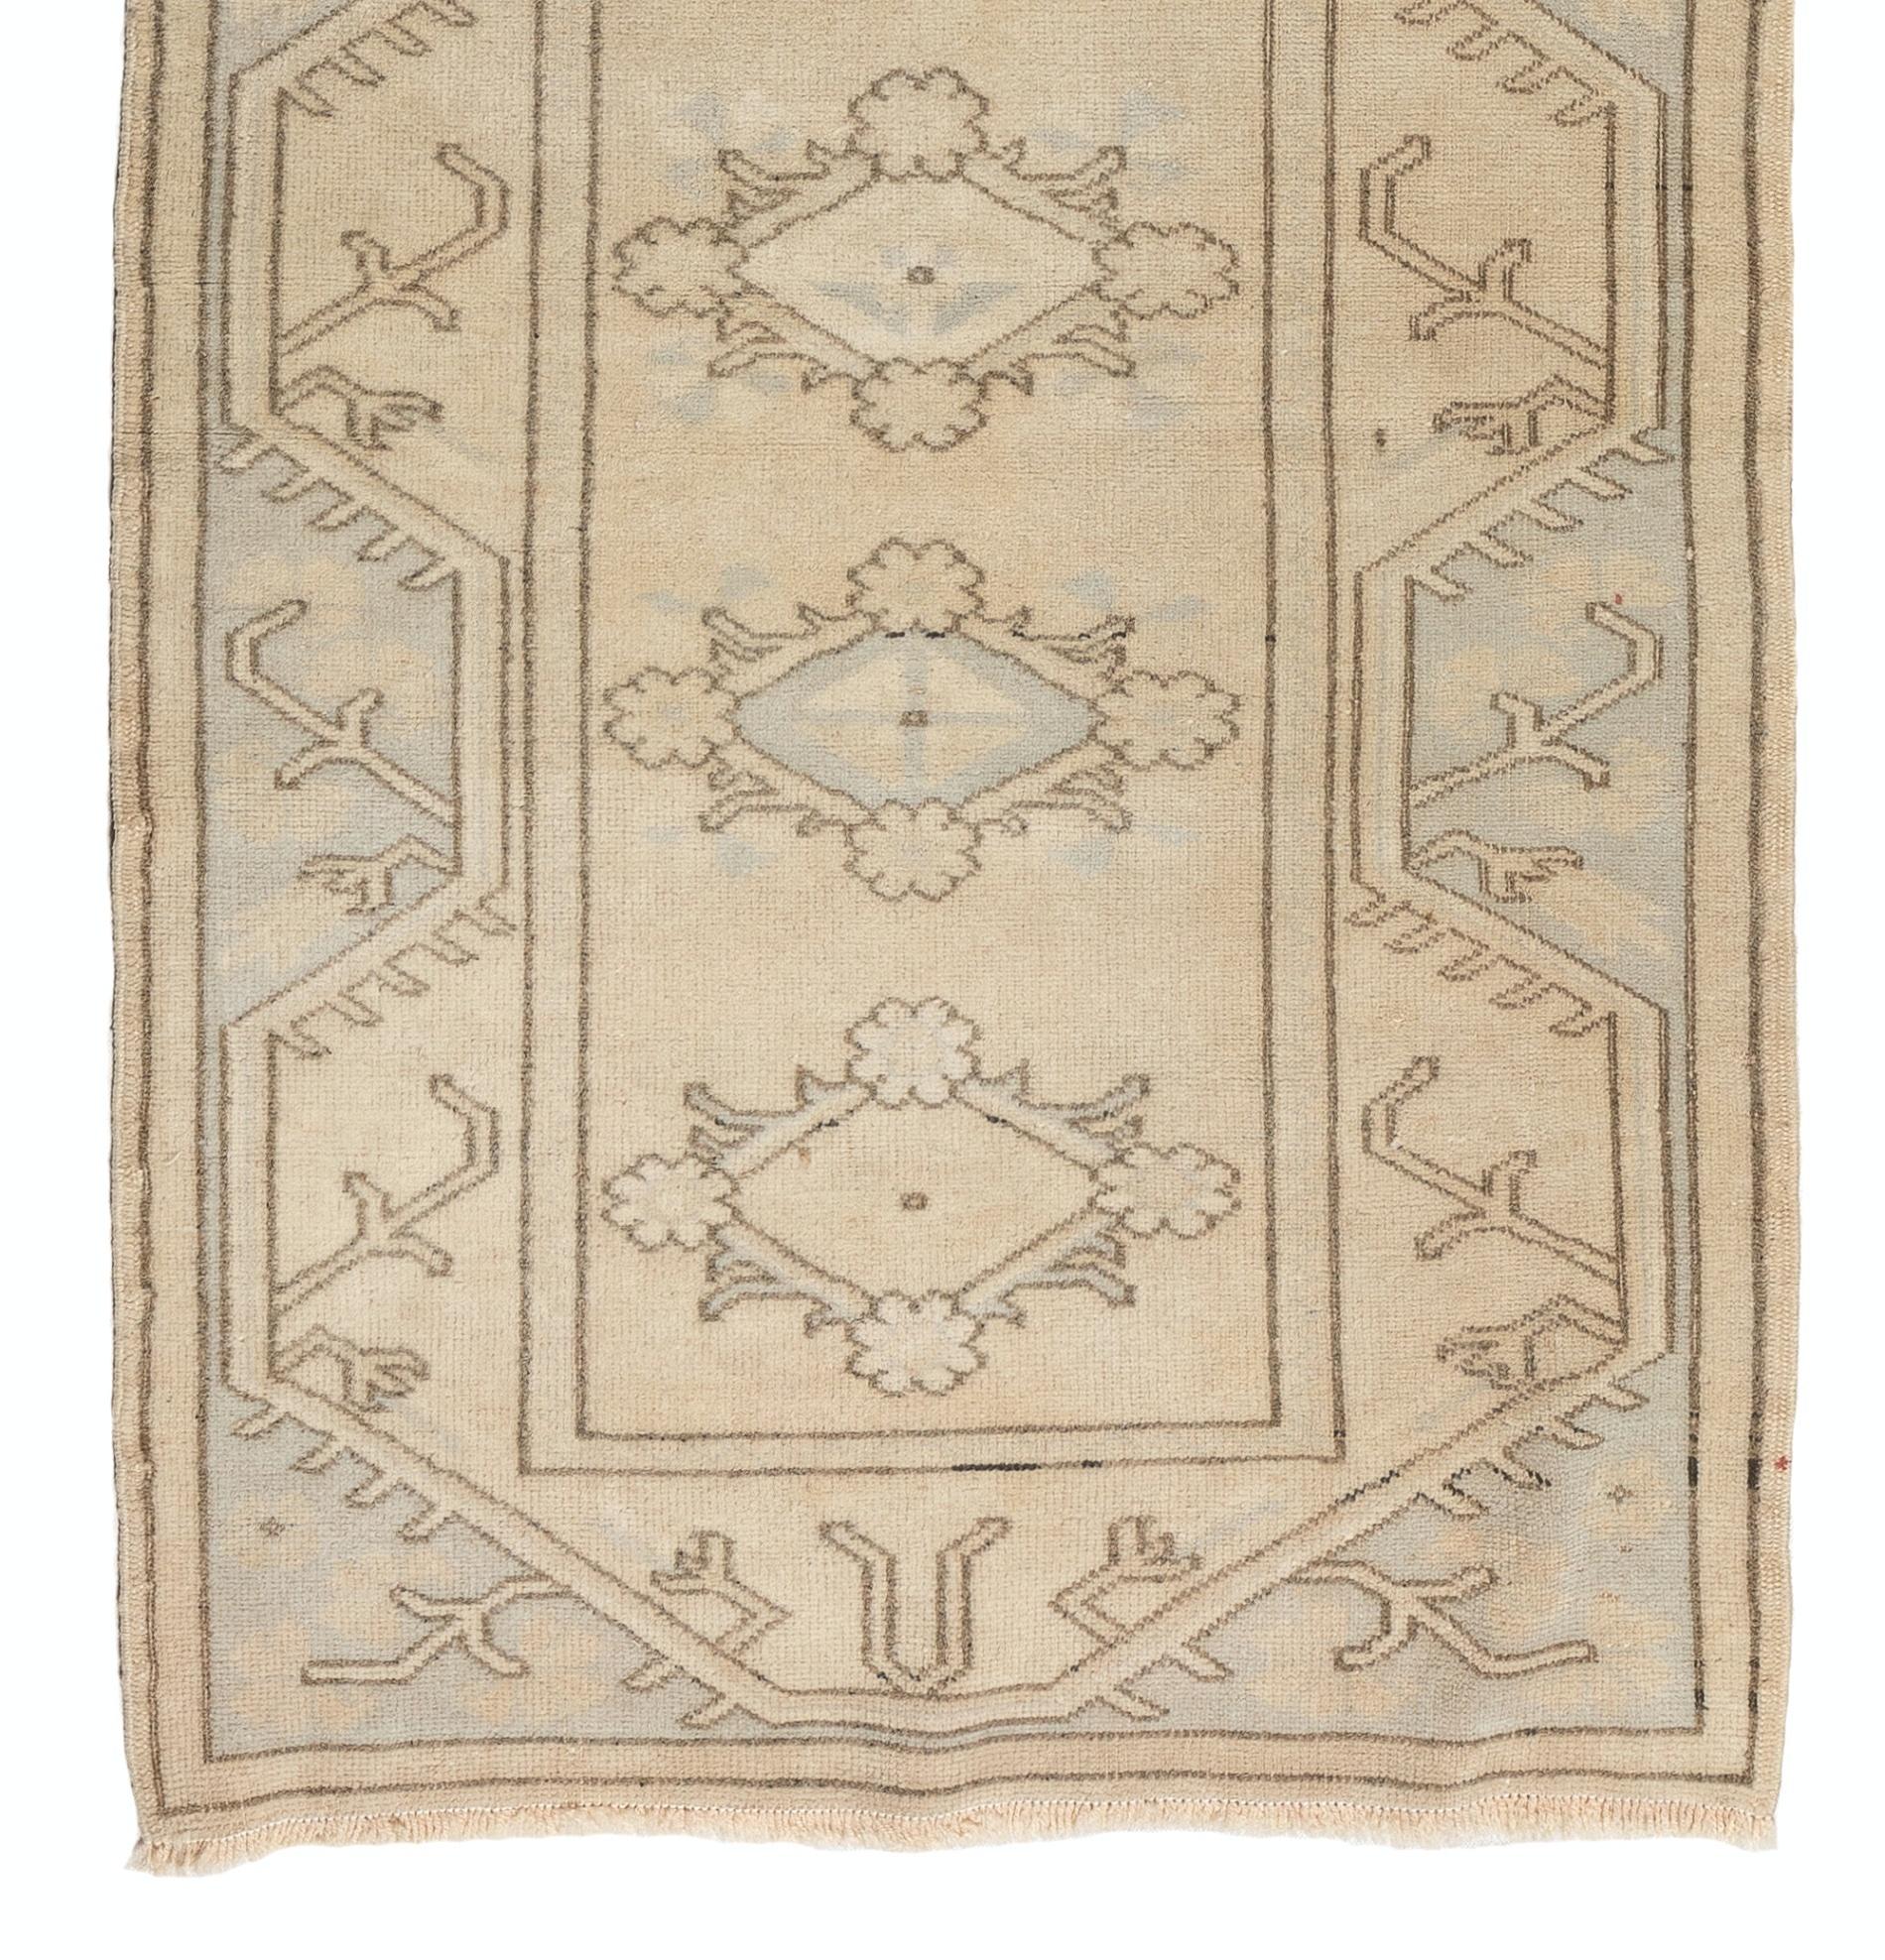 A vintage handmade Turkish runner rug with a geometric design of multiple lozenge-shaped medallions embellished with floral heads as well as angular stem and leaf motifs in sand beige and very light blue. The rug was hand-knotted in Turkey in the